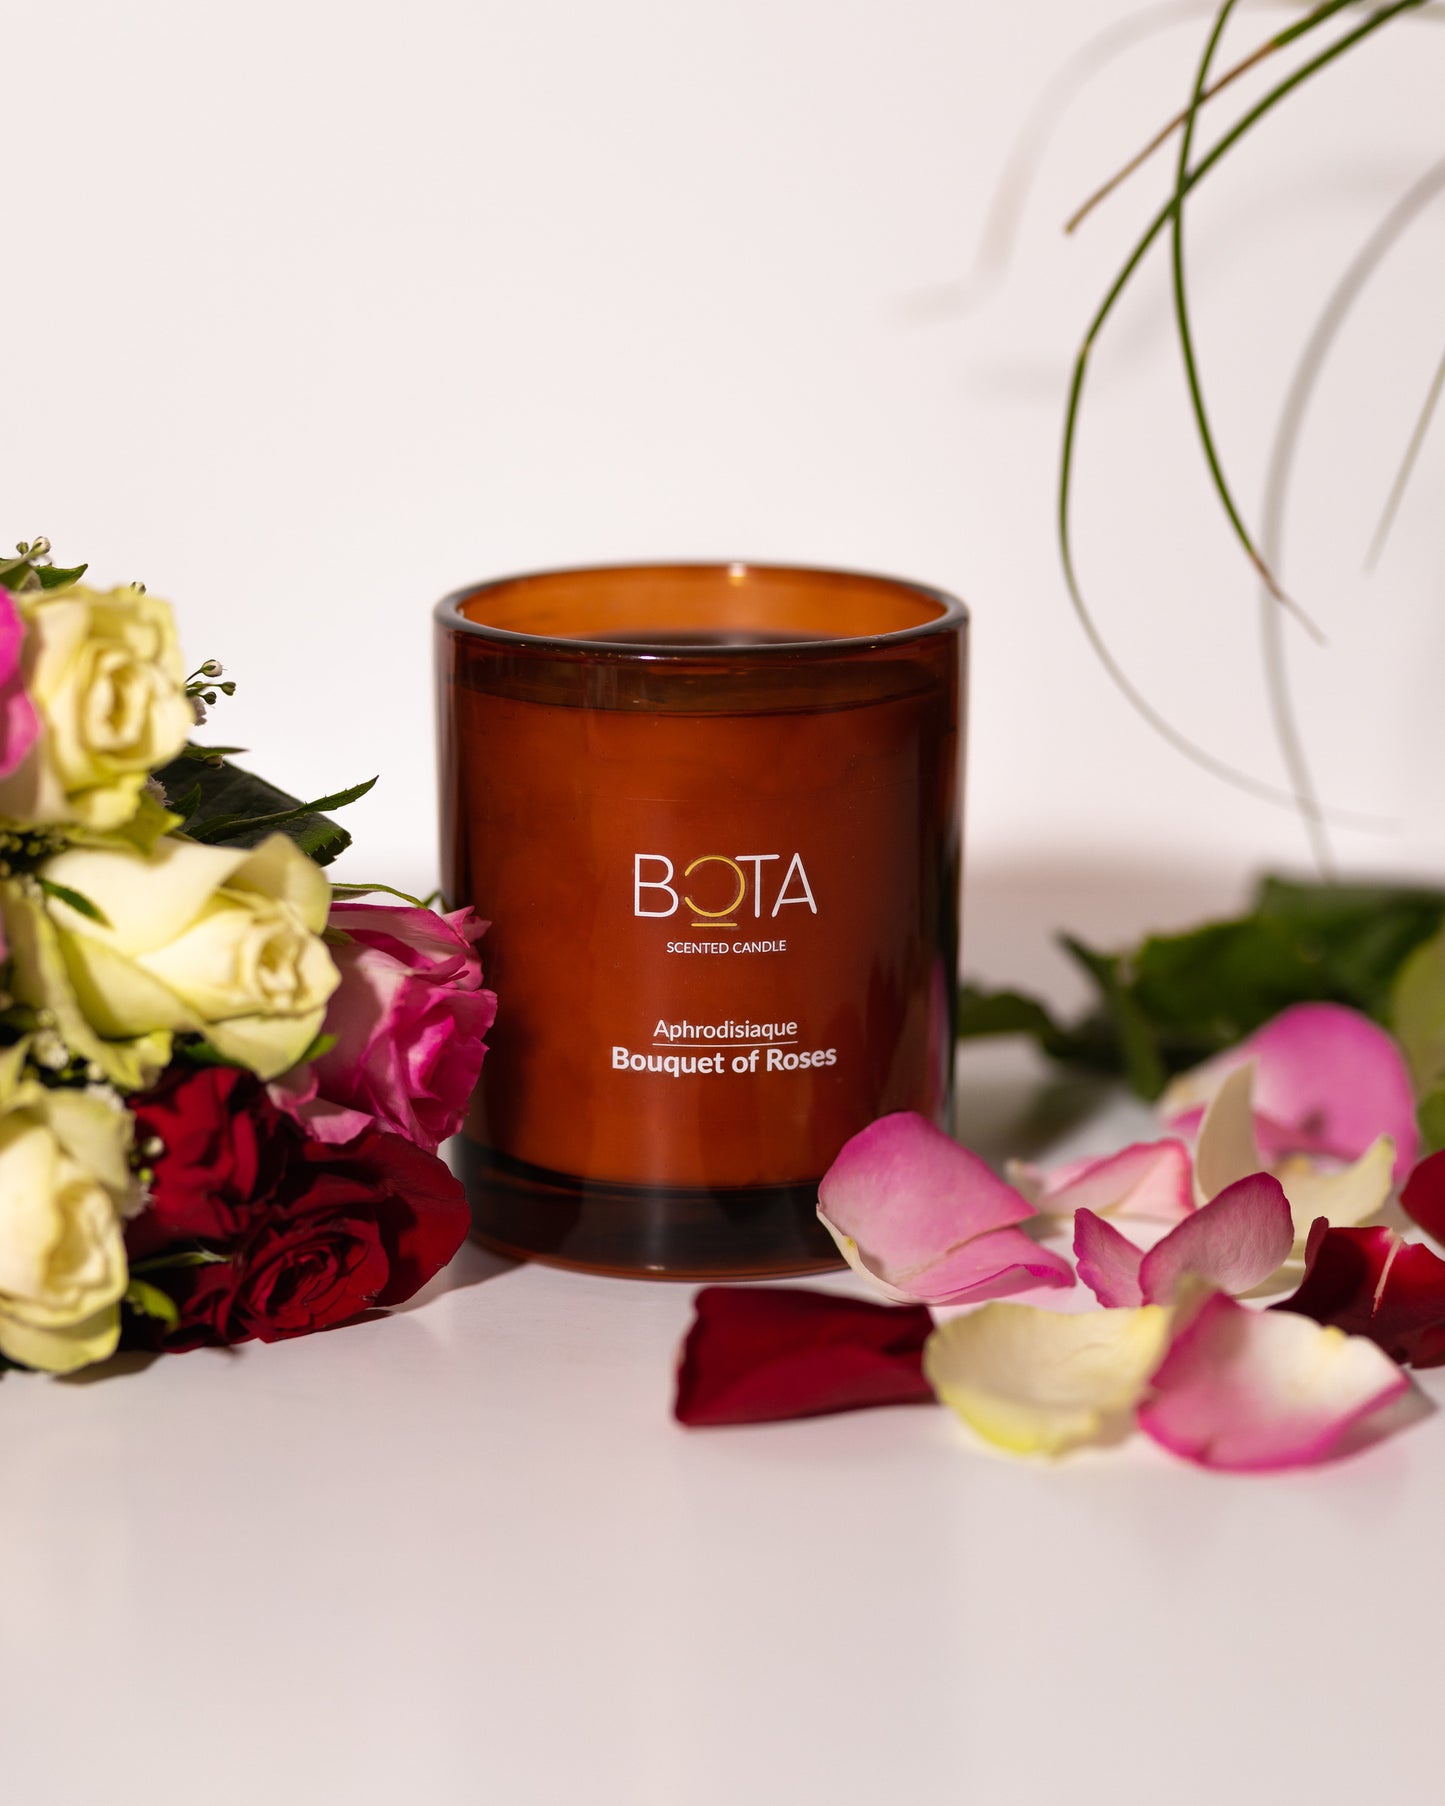 Aphrodisiaque collection: Bouquet of Roses SCENTED Candle